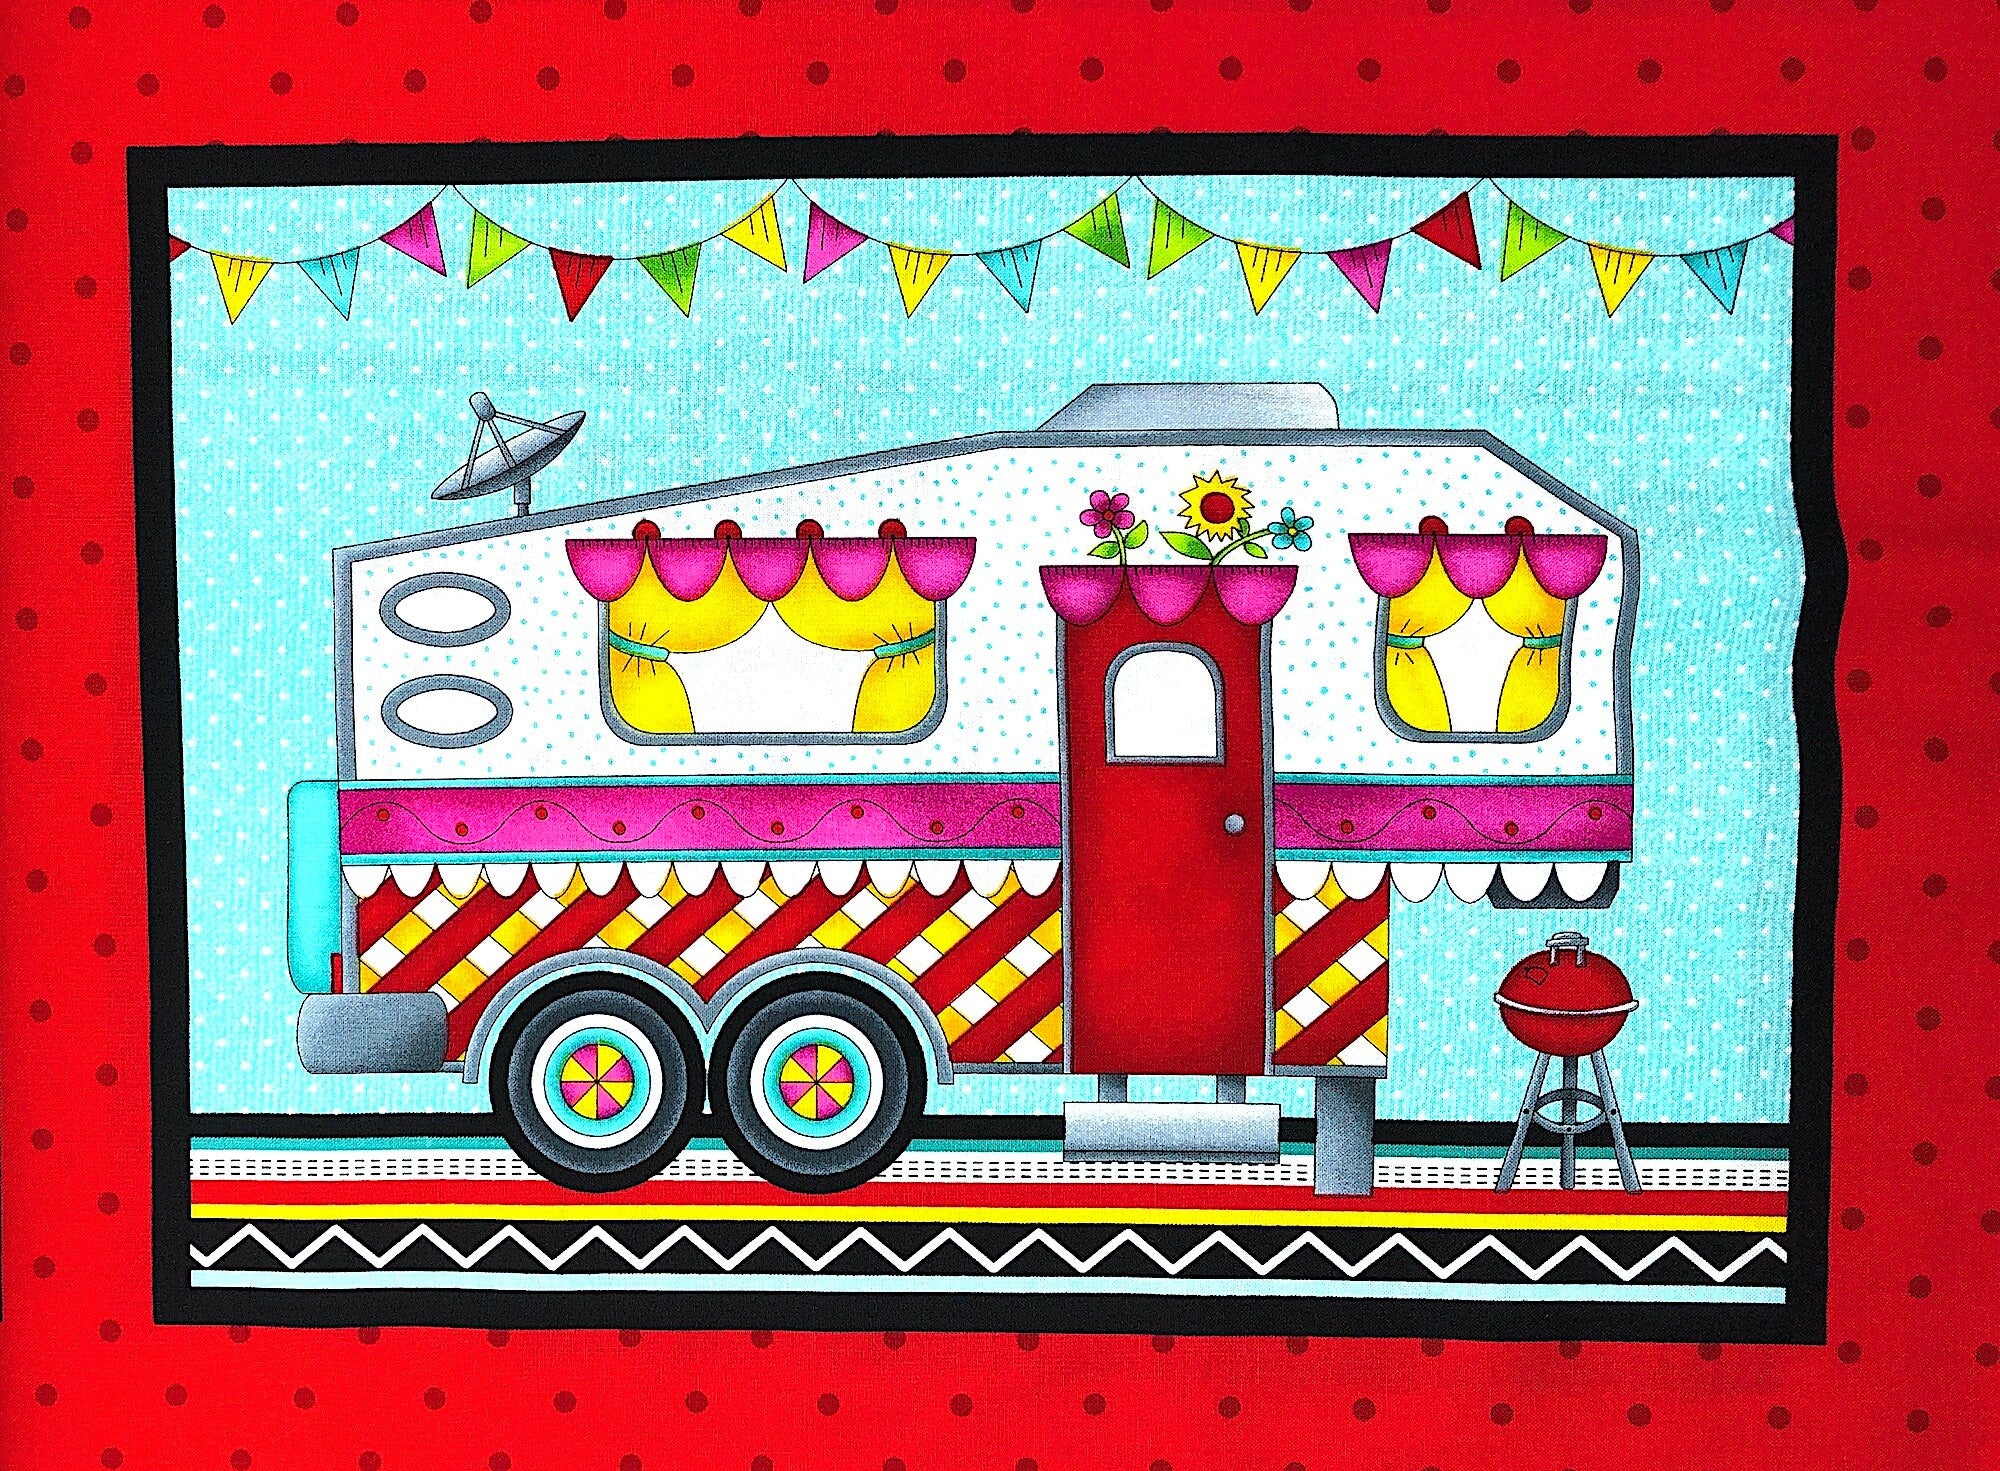 You will find either a motorhome, travel trailer, 5th wheel or camper in each of the panels on this fabric. Each square is about 14"x10". You will receive 1 panel (6 squares) which is approximately 35 inches wide. This fabric is part of the Roaming Holiday Collection by Pam Bocko.